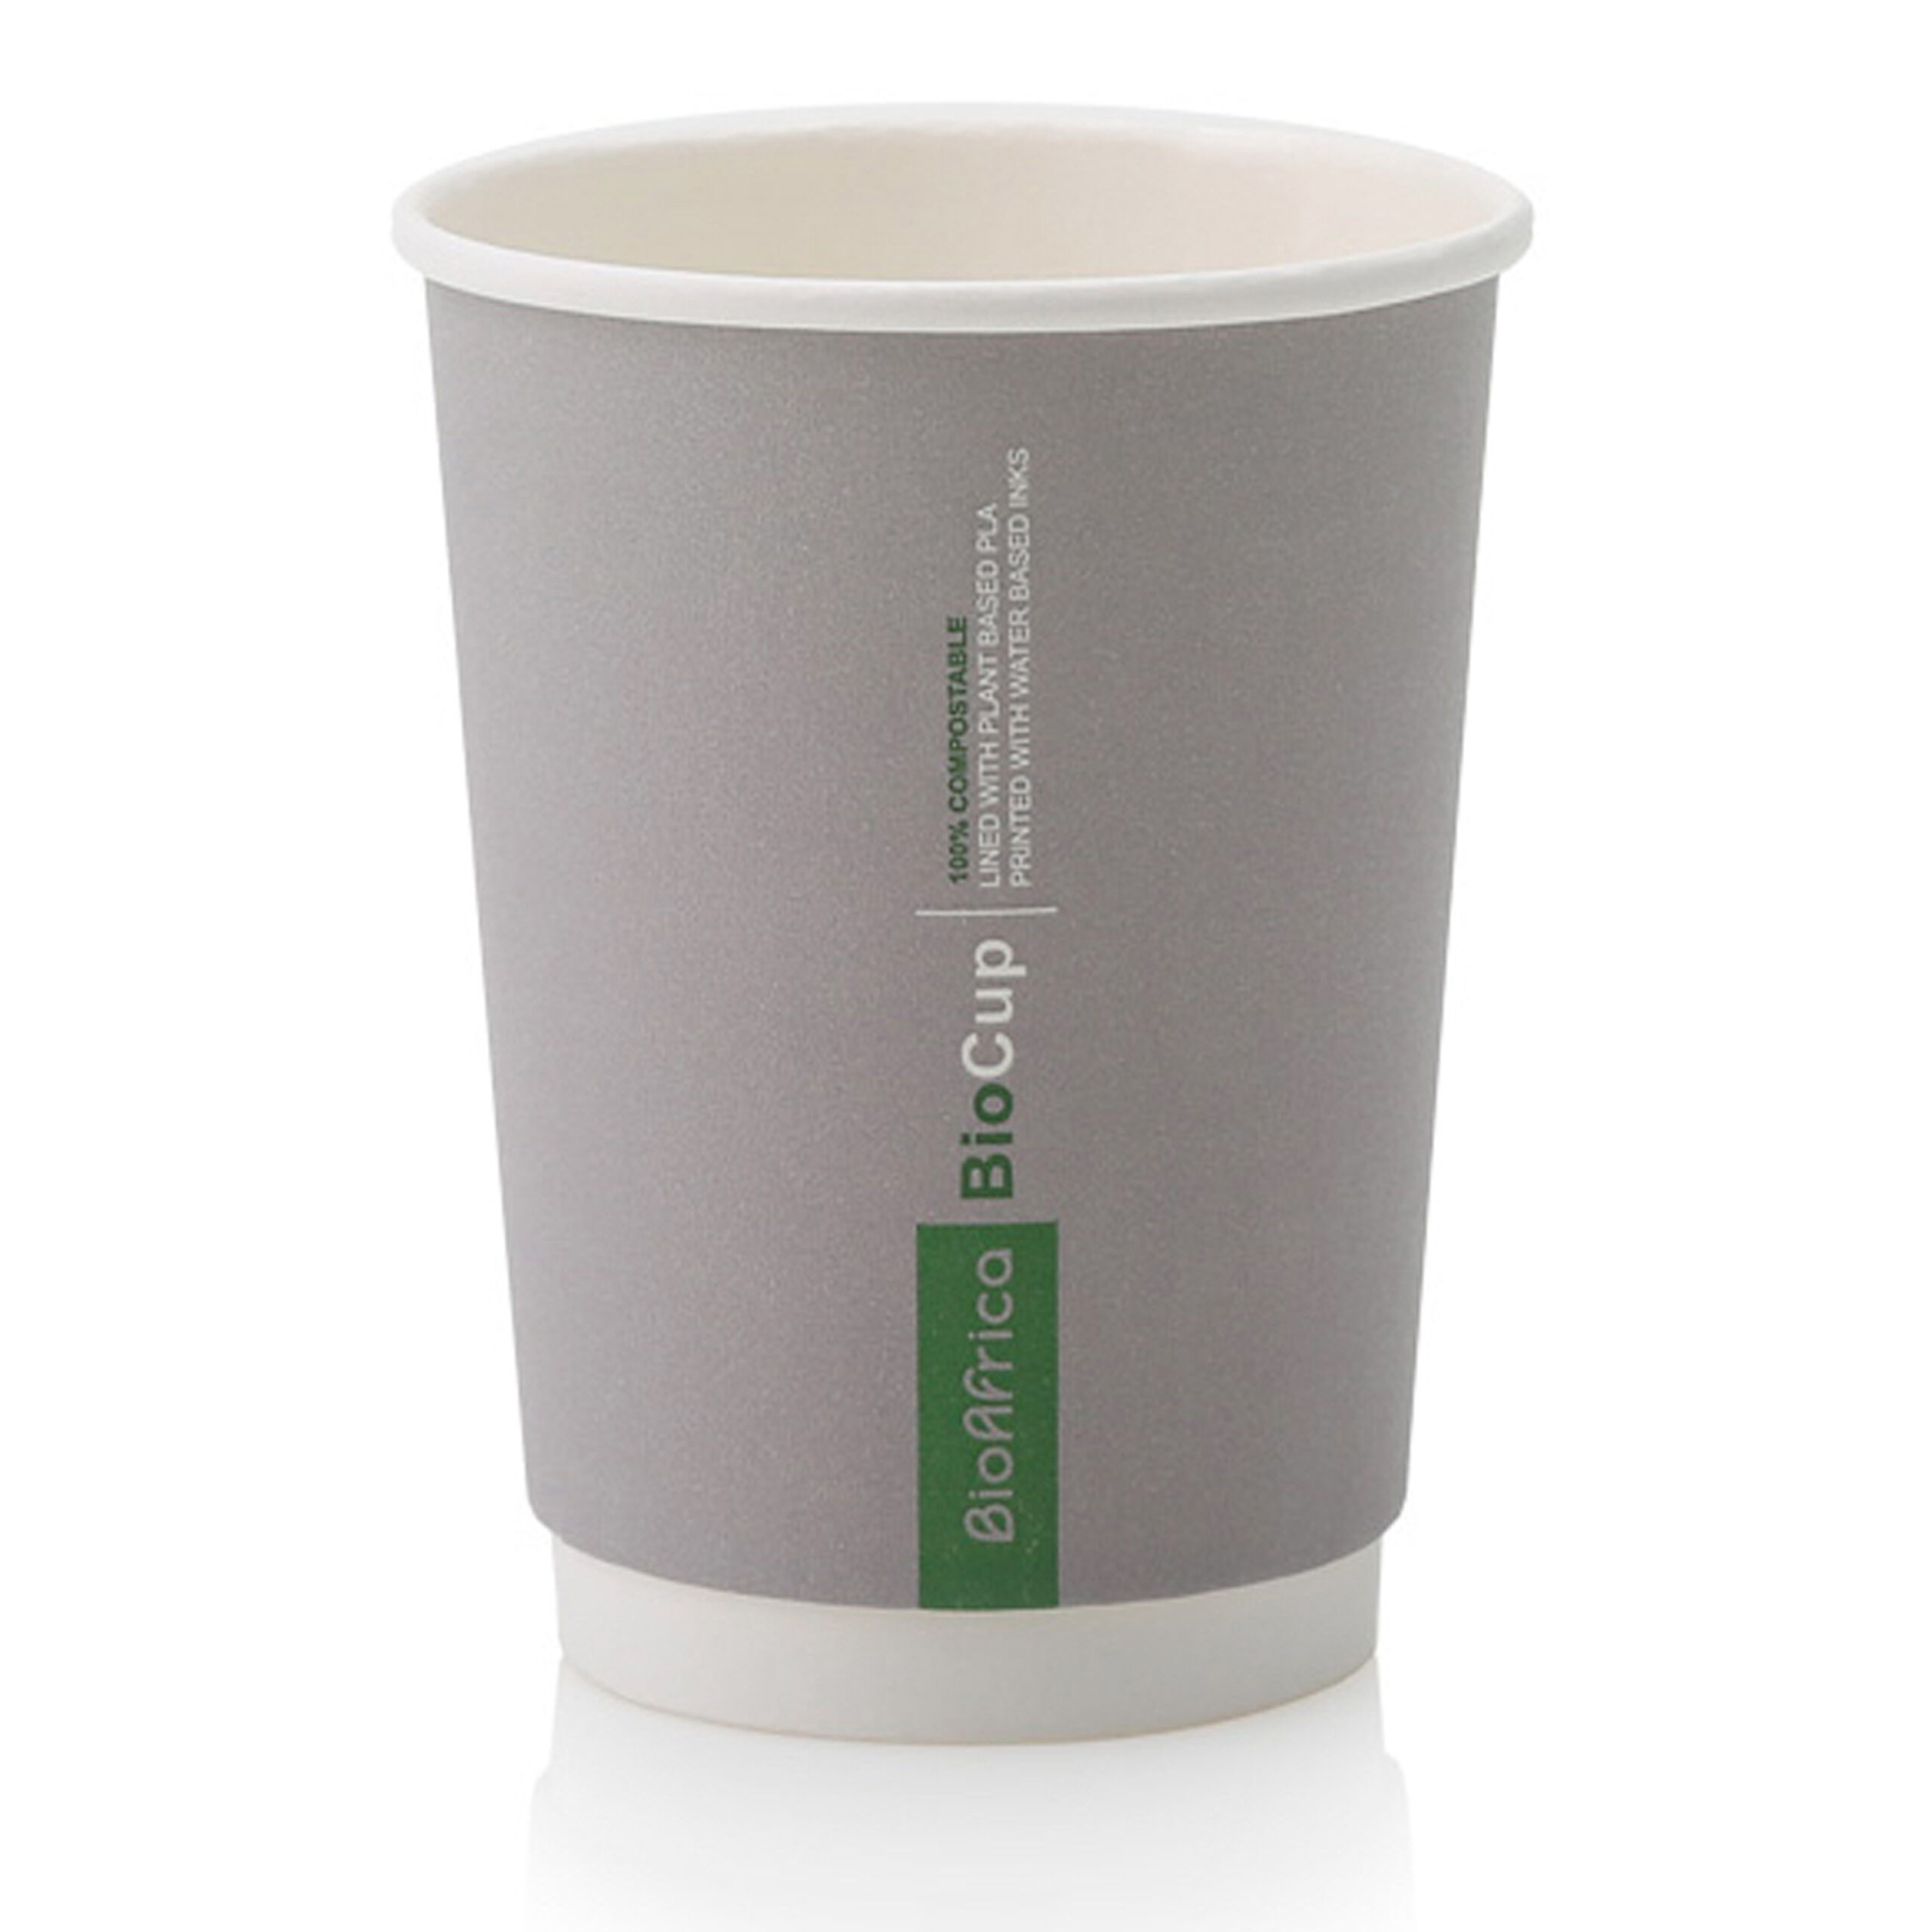 BIOAFRICA DOUBLE WALL COMPOSTABLE BIOCUP 350ml CHARCOAL 1x25